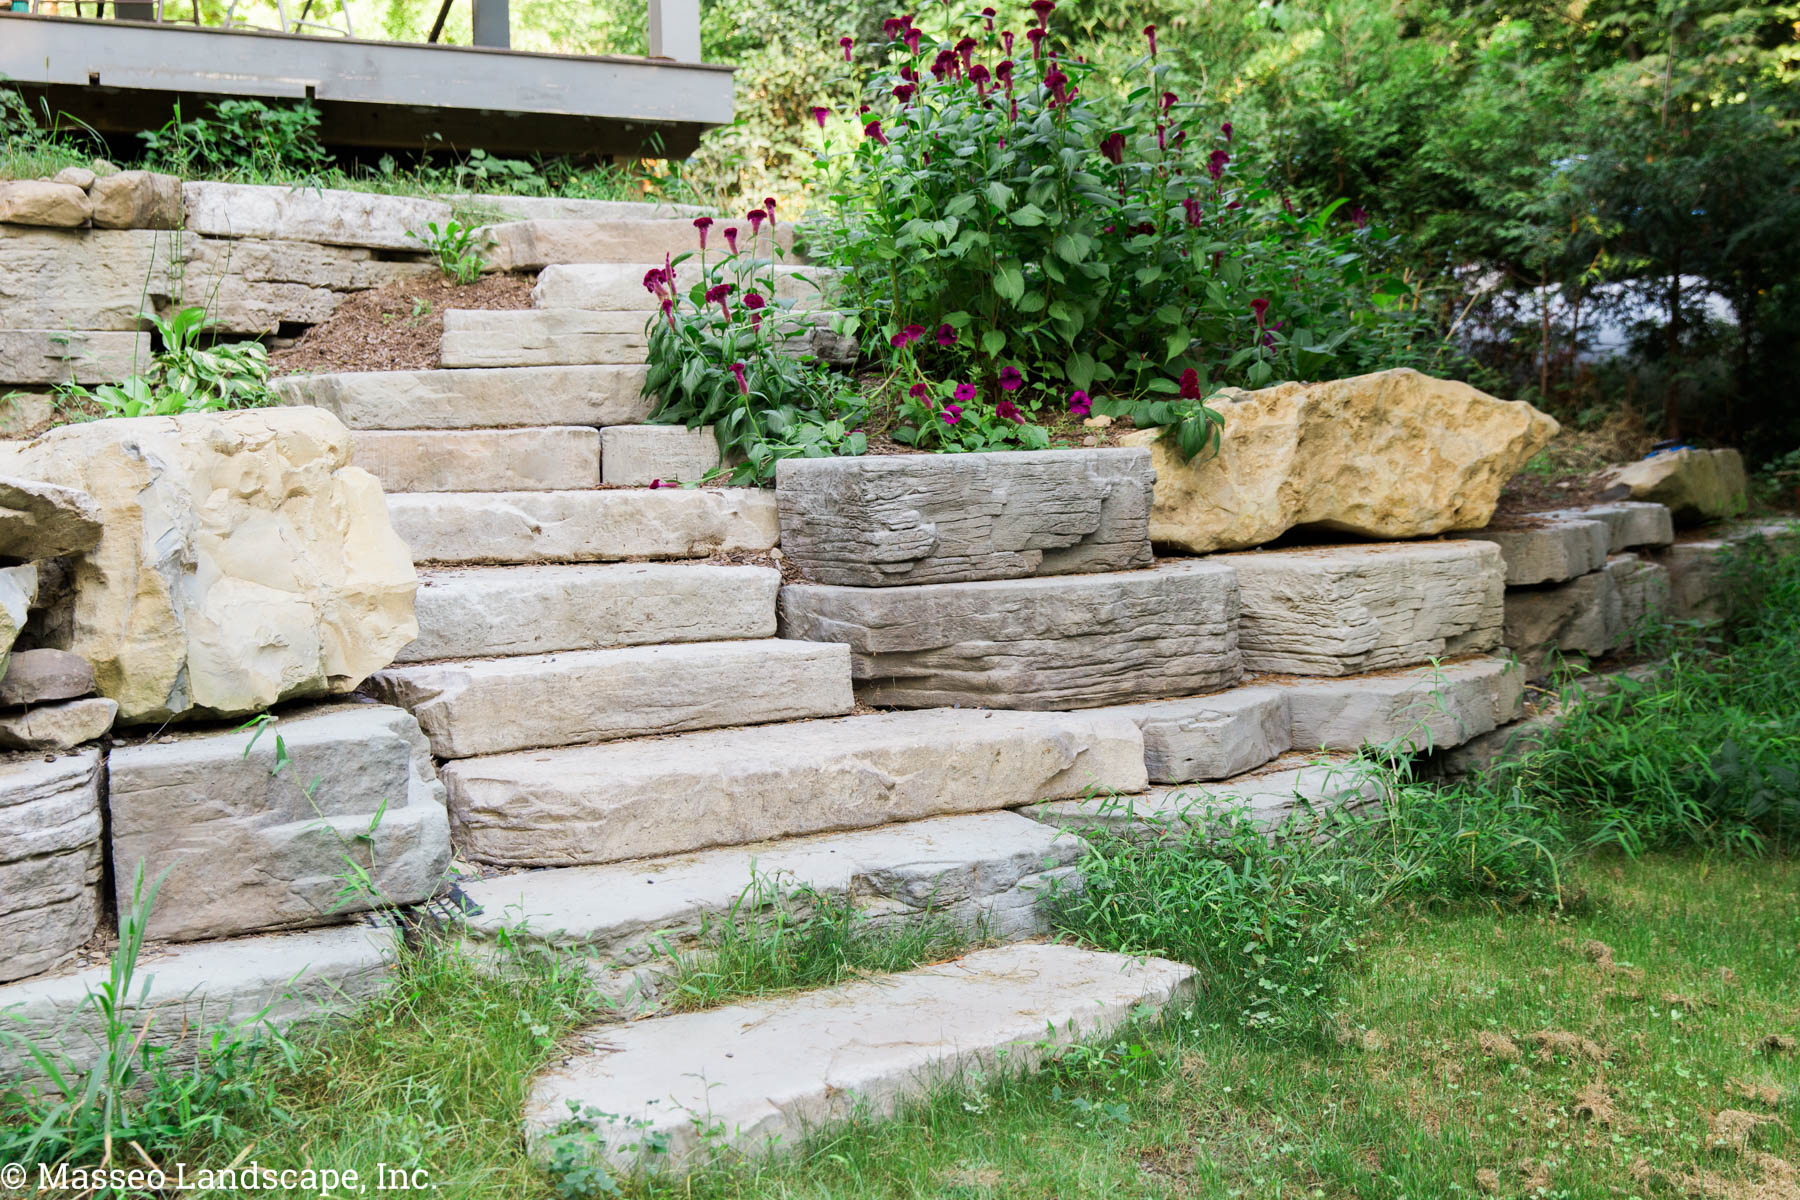 A stone-texture precast concrete entryway and steps installed by Masseo Landscape, High Falls Landscape Designers